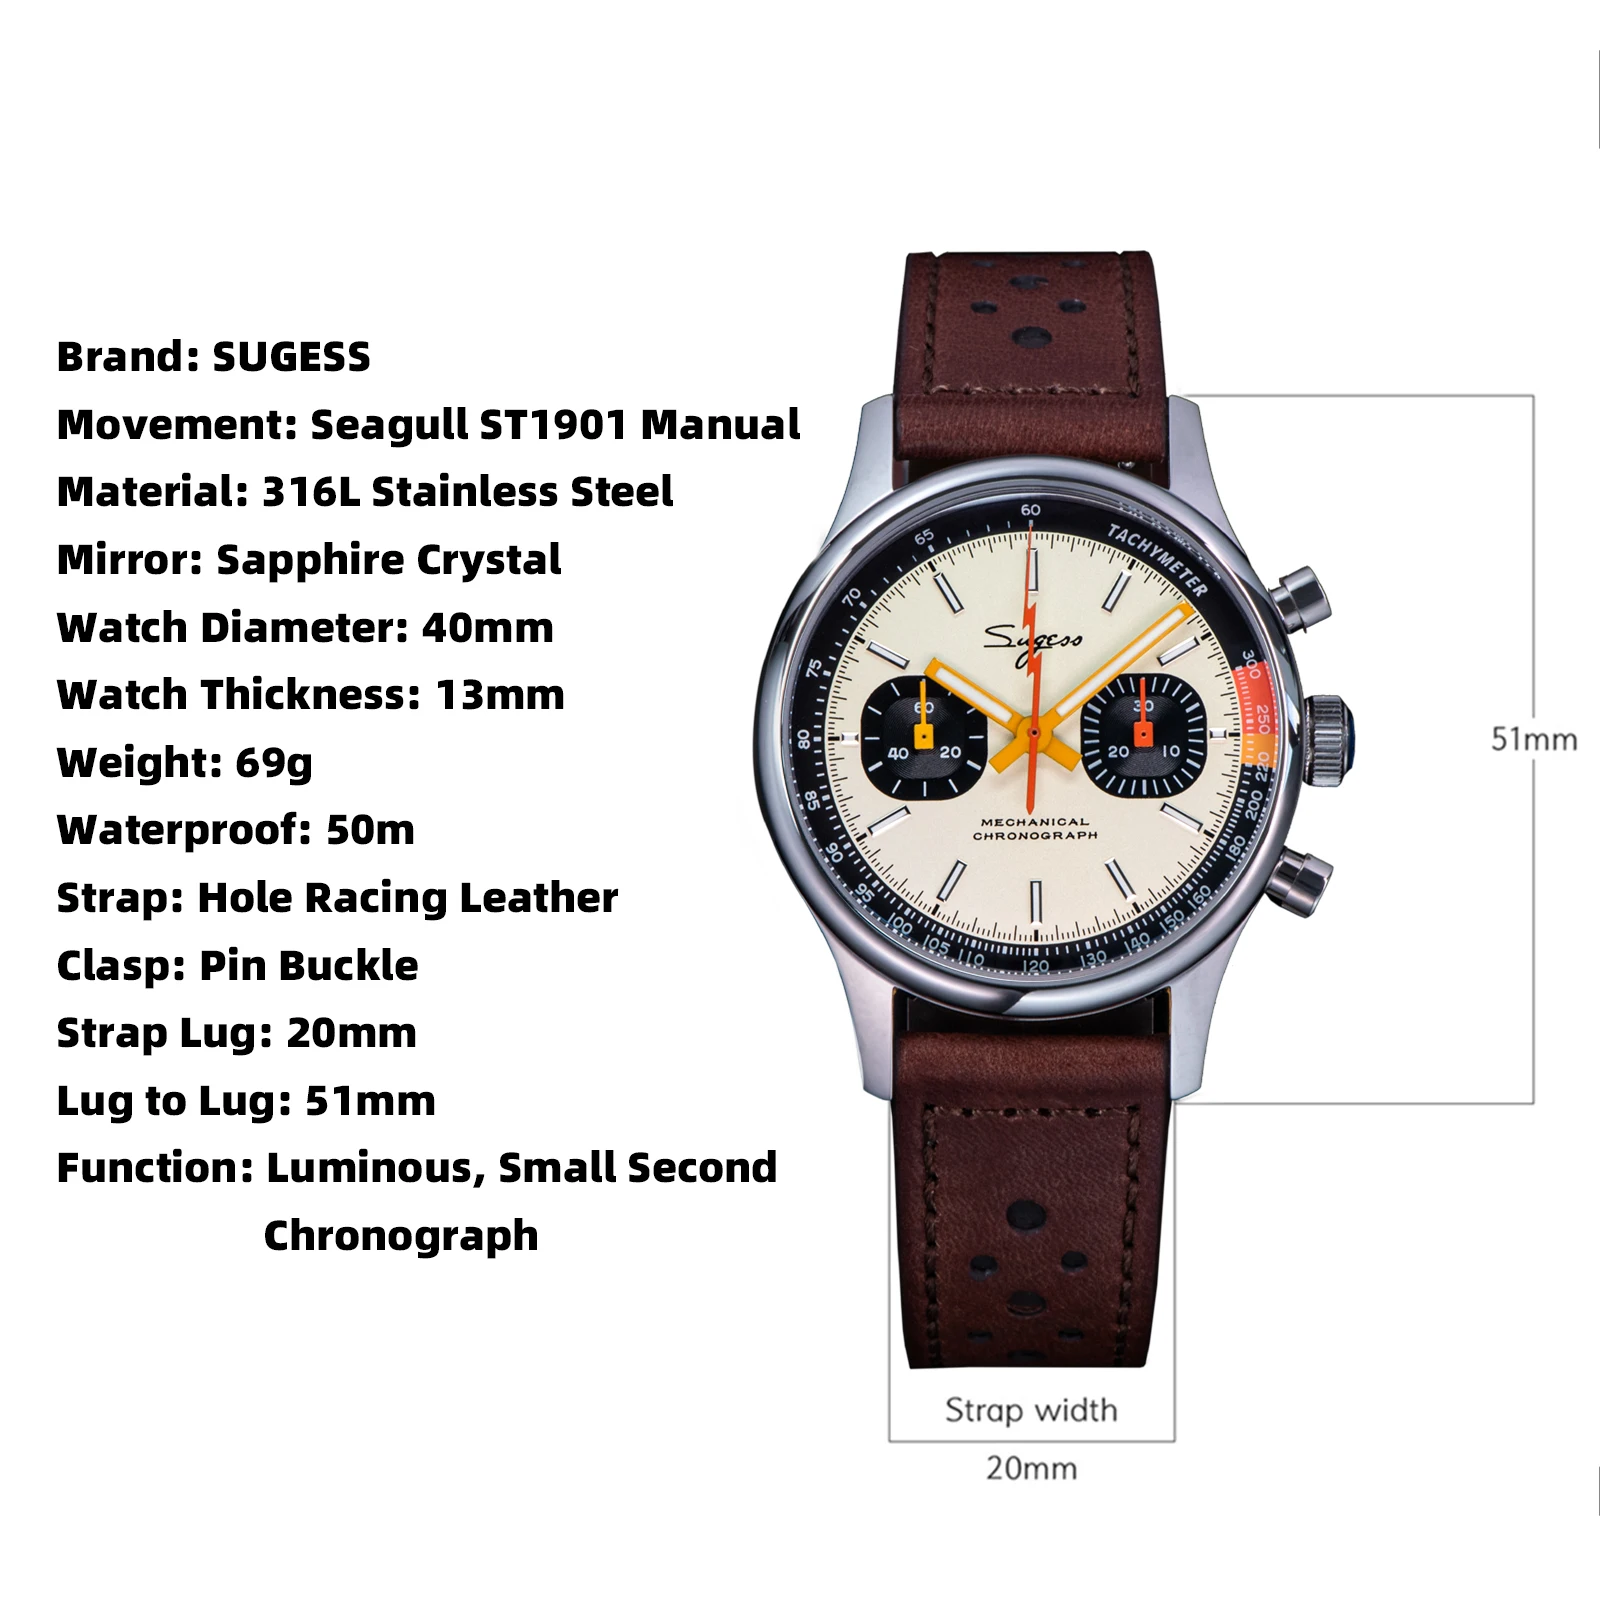 Sugess Watch of Men Chronograph Mechanical Wristwatches with Seagull ST19 Swanneck Movement Pilot Sapphire Crystal Racing V2 New